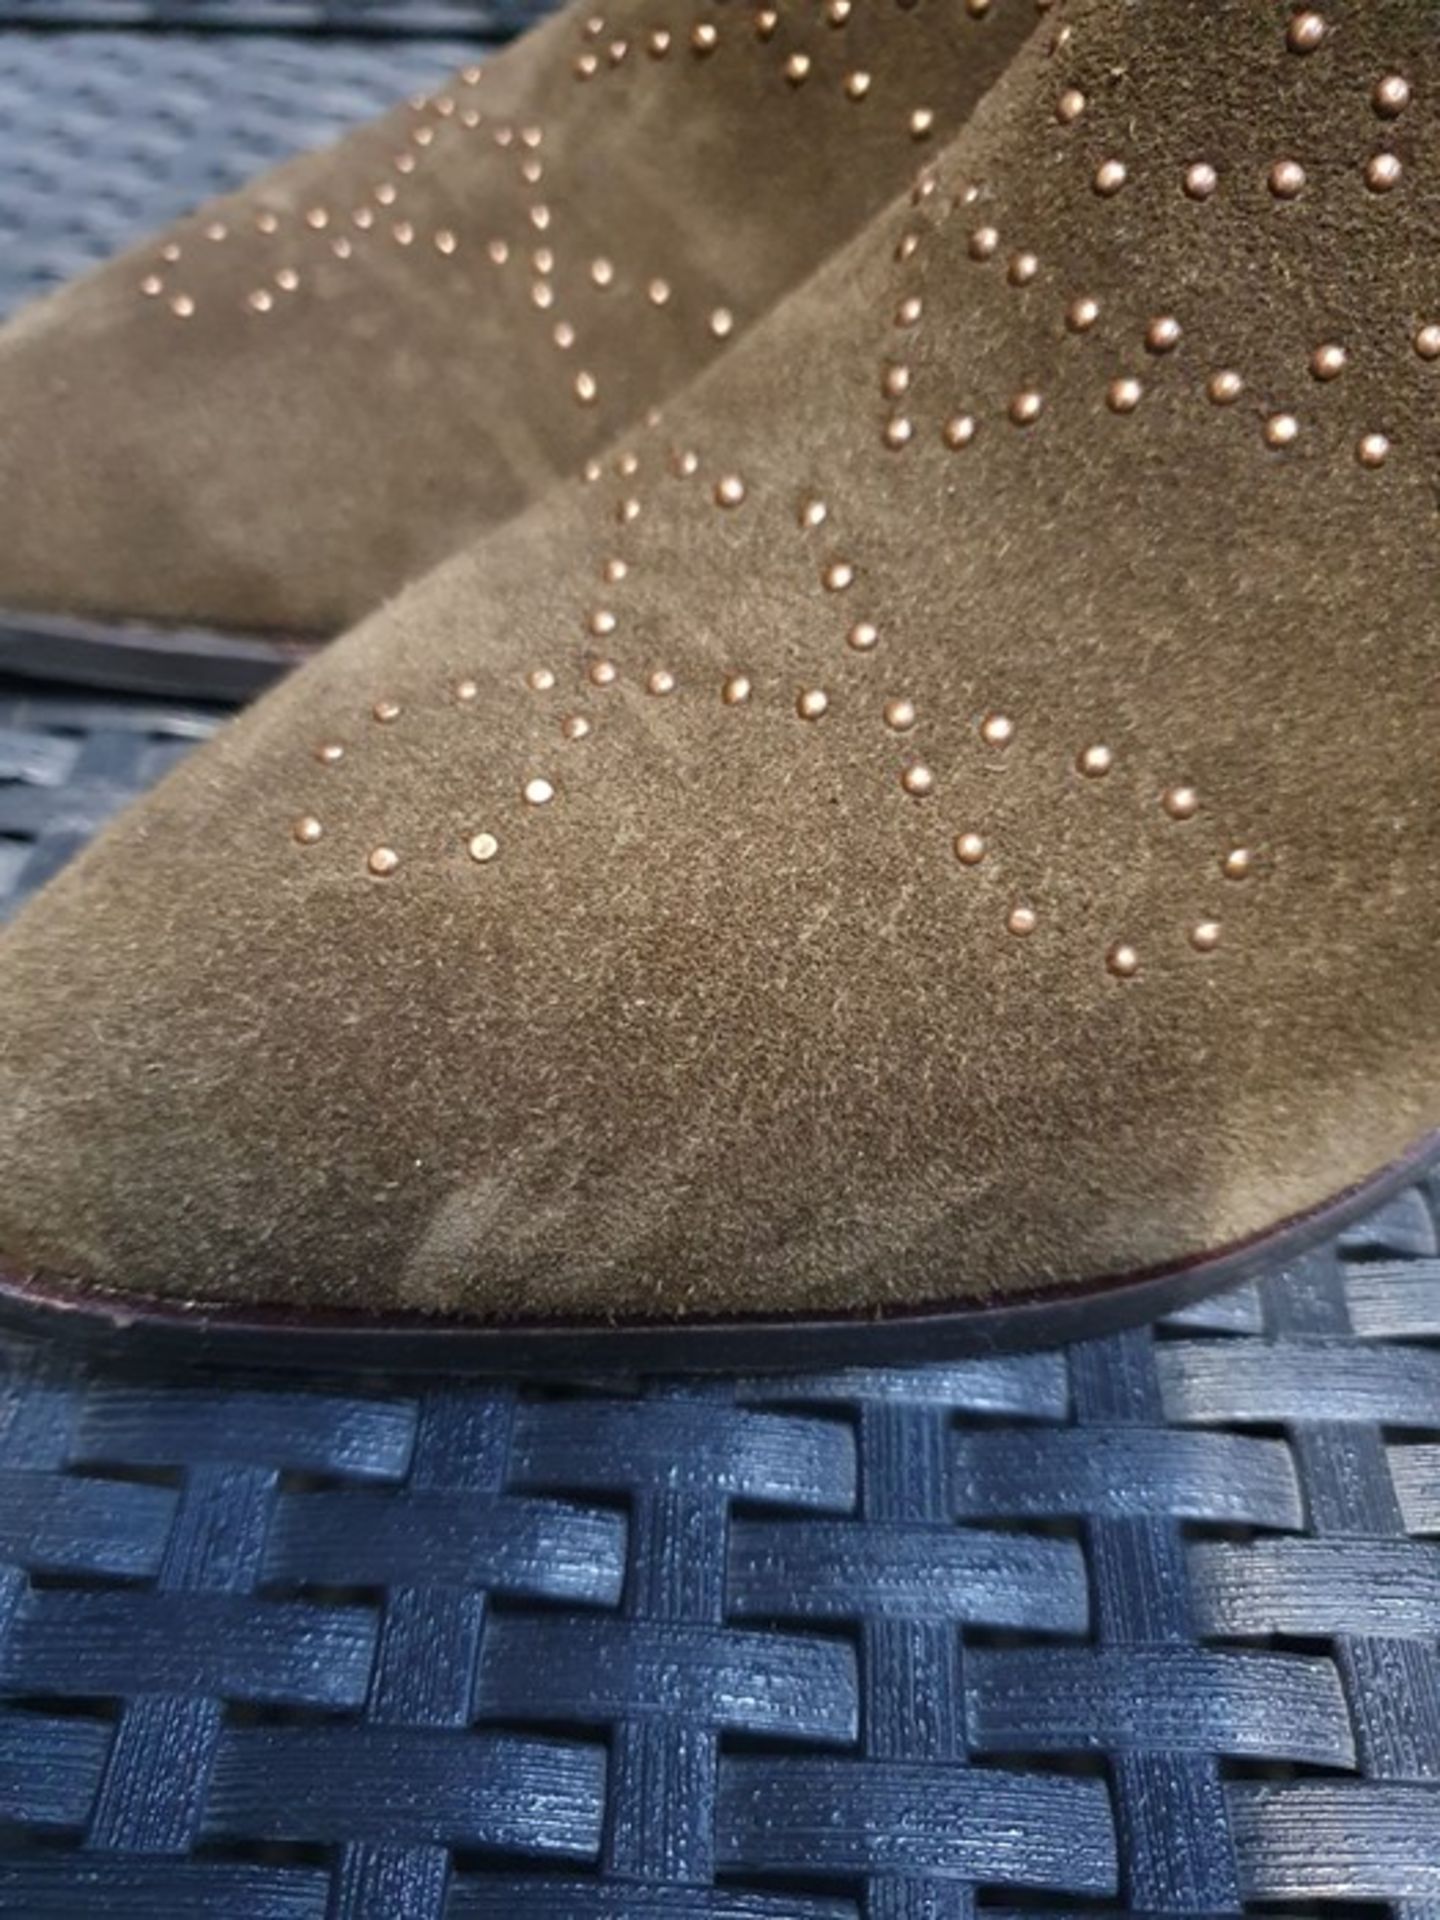 ONE PAIR OF LA REDOUTE COLLECTIONS STUDDED SUEDE ANKLE BOOTS IN KHAKI - SIZE UK 5.5. RRP £88.00. - Image 2 of 2